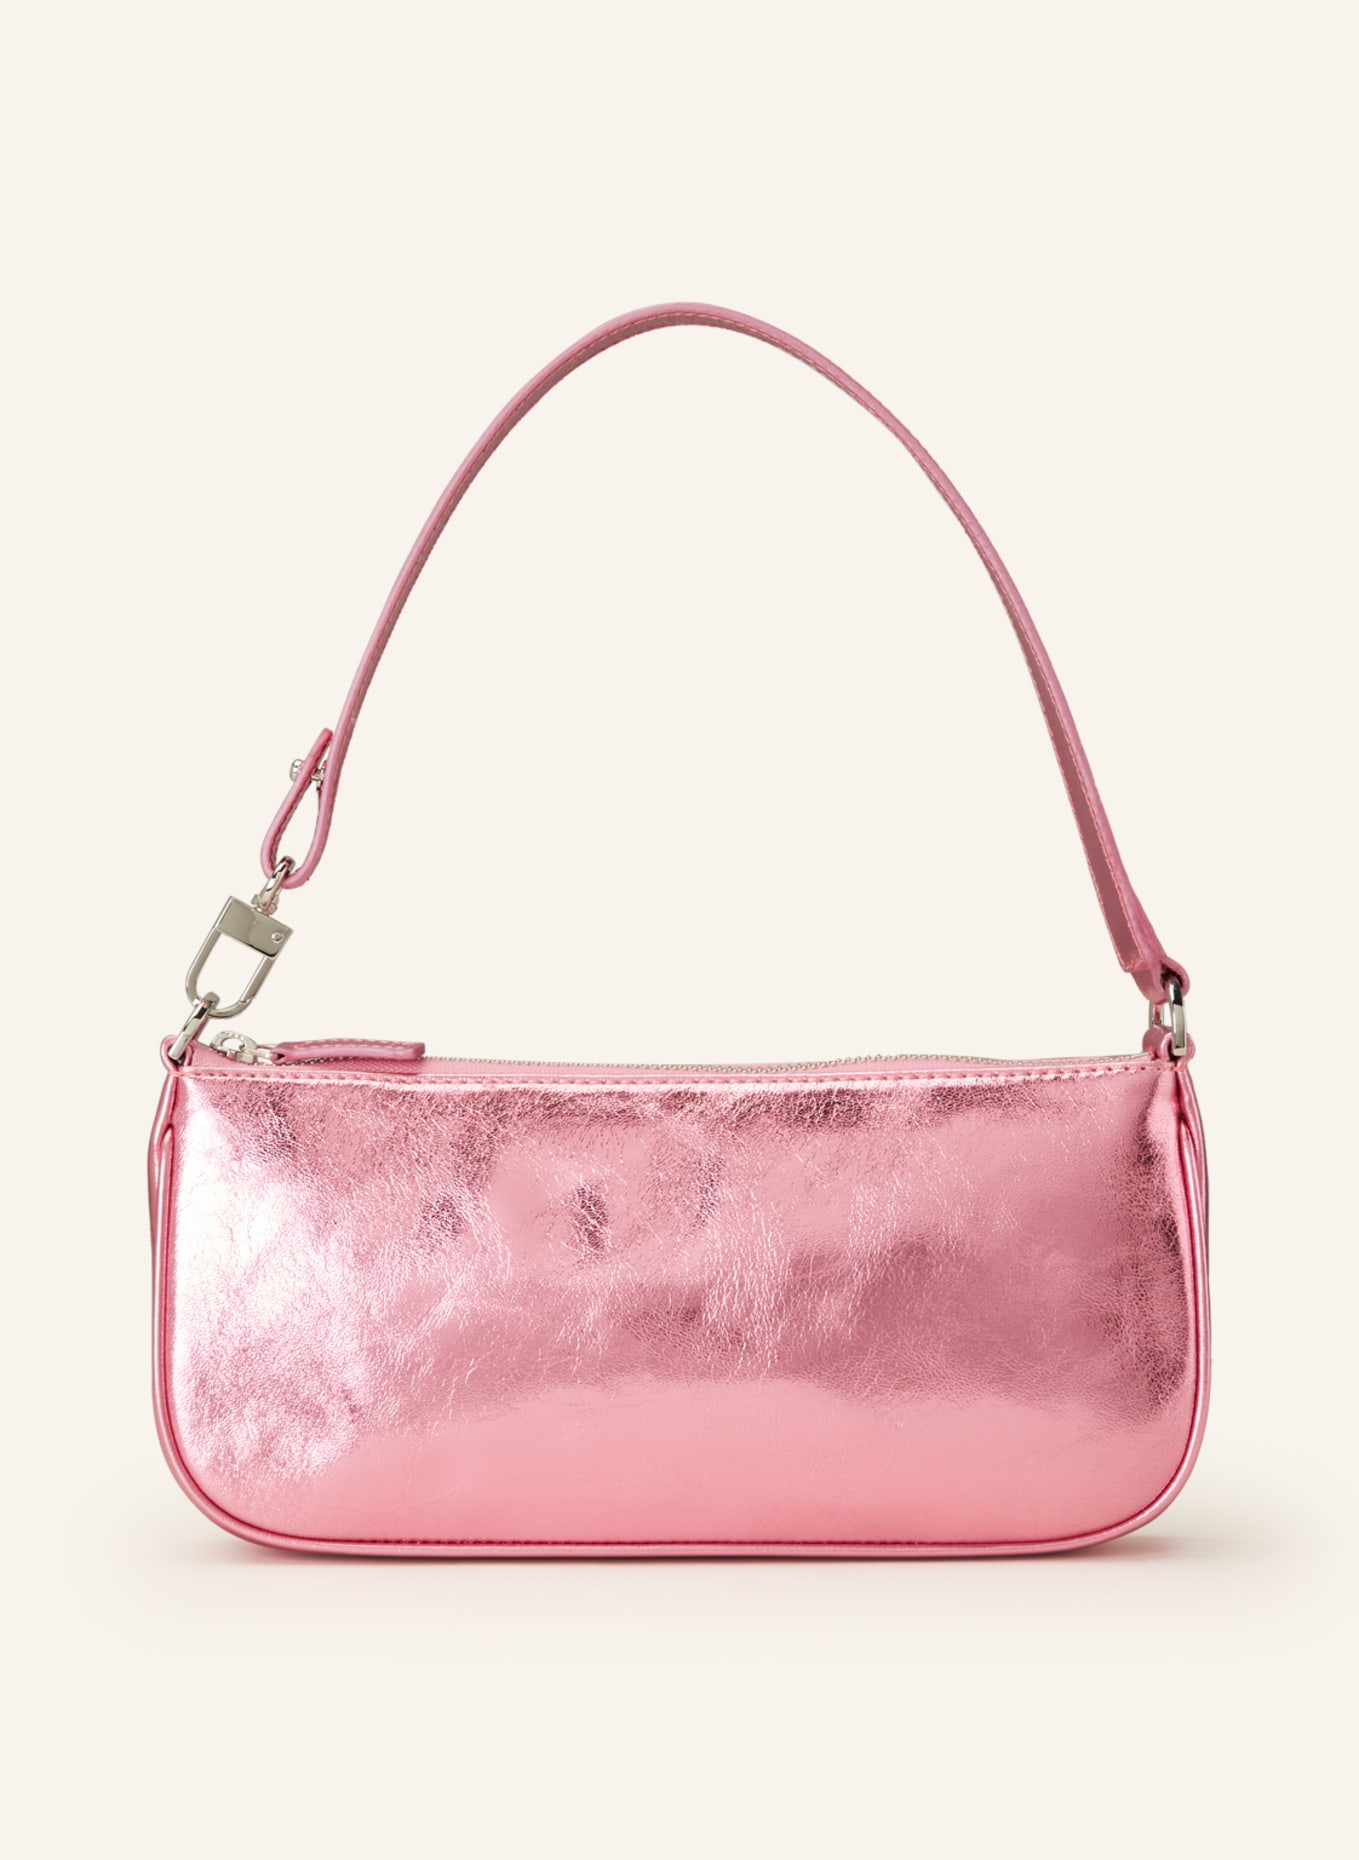 BY FAR RACHEL PATENT LEATHER BAG - BABY PINK